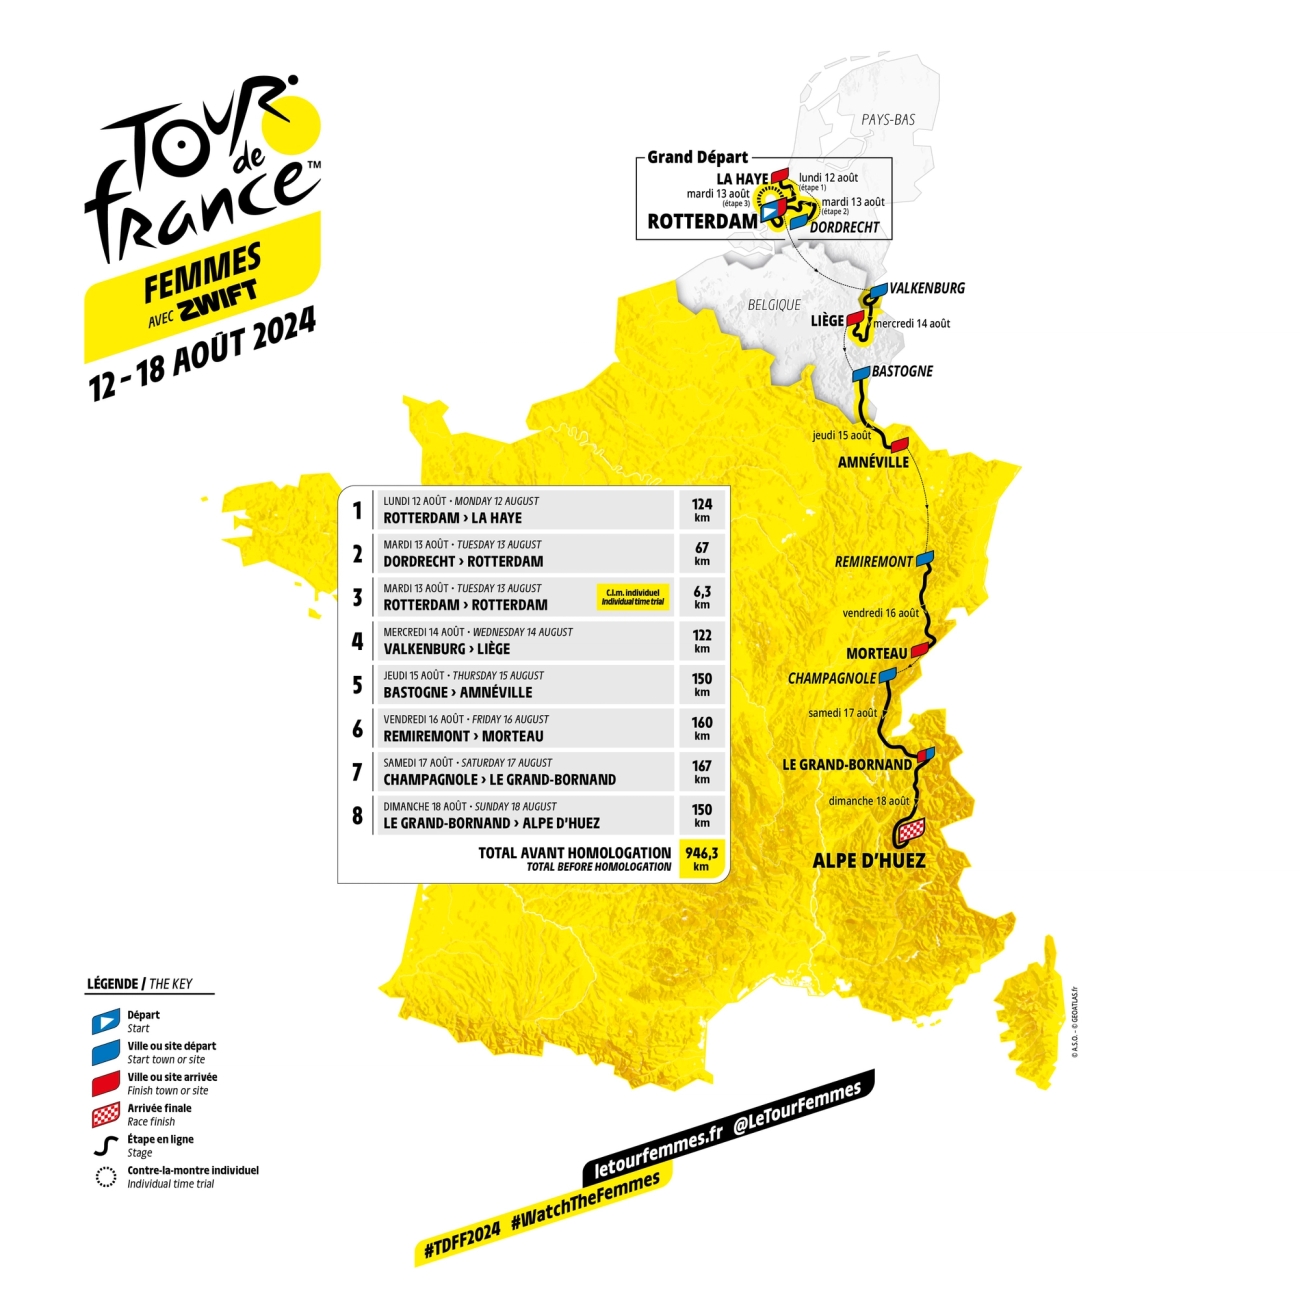 The Tour de France Femmes will culminate atop Alpe d'Huez for the first time